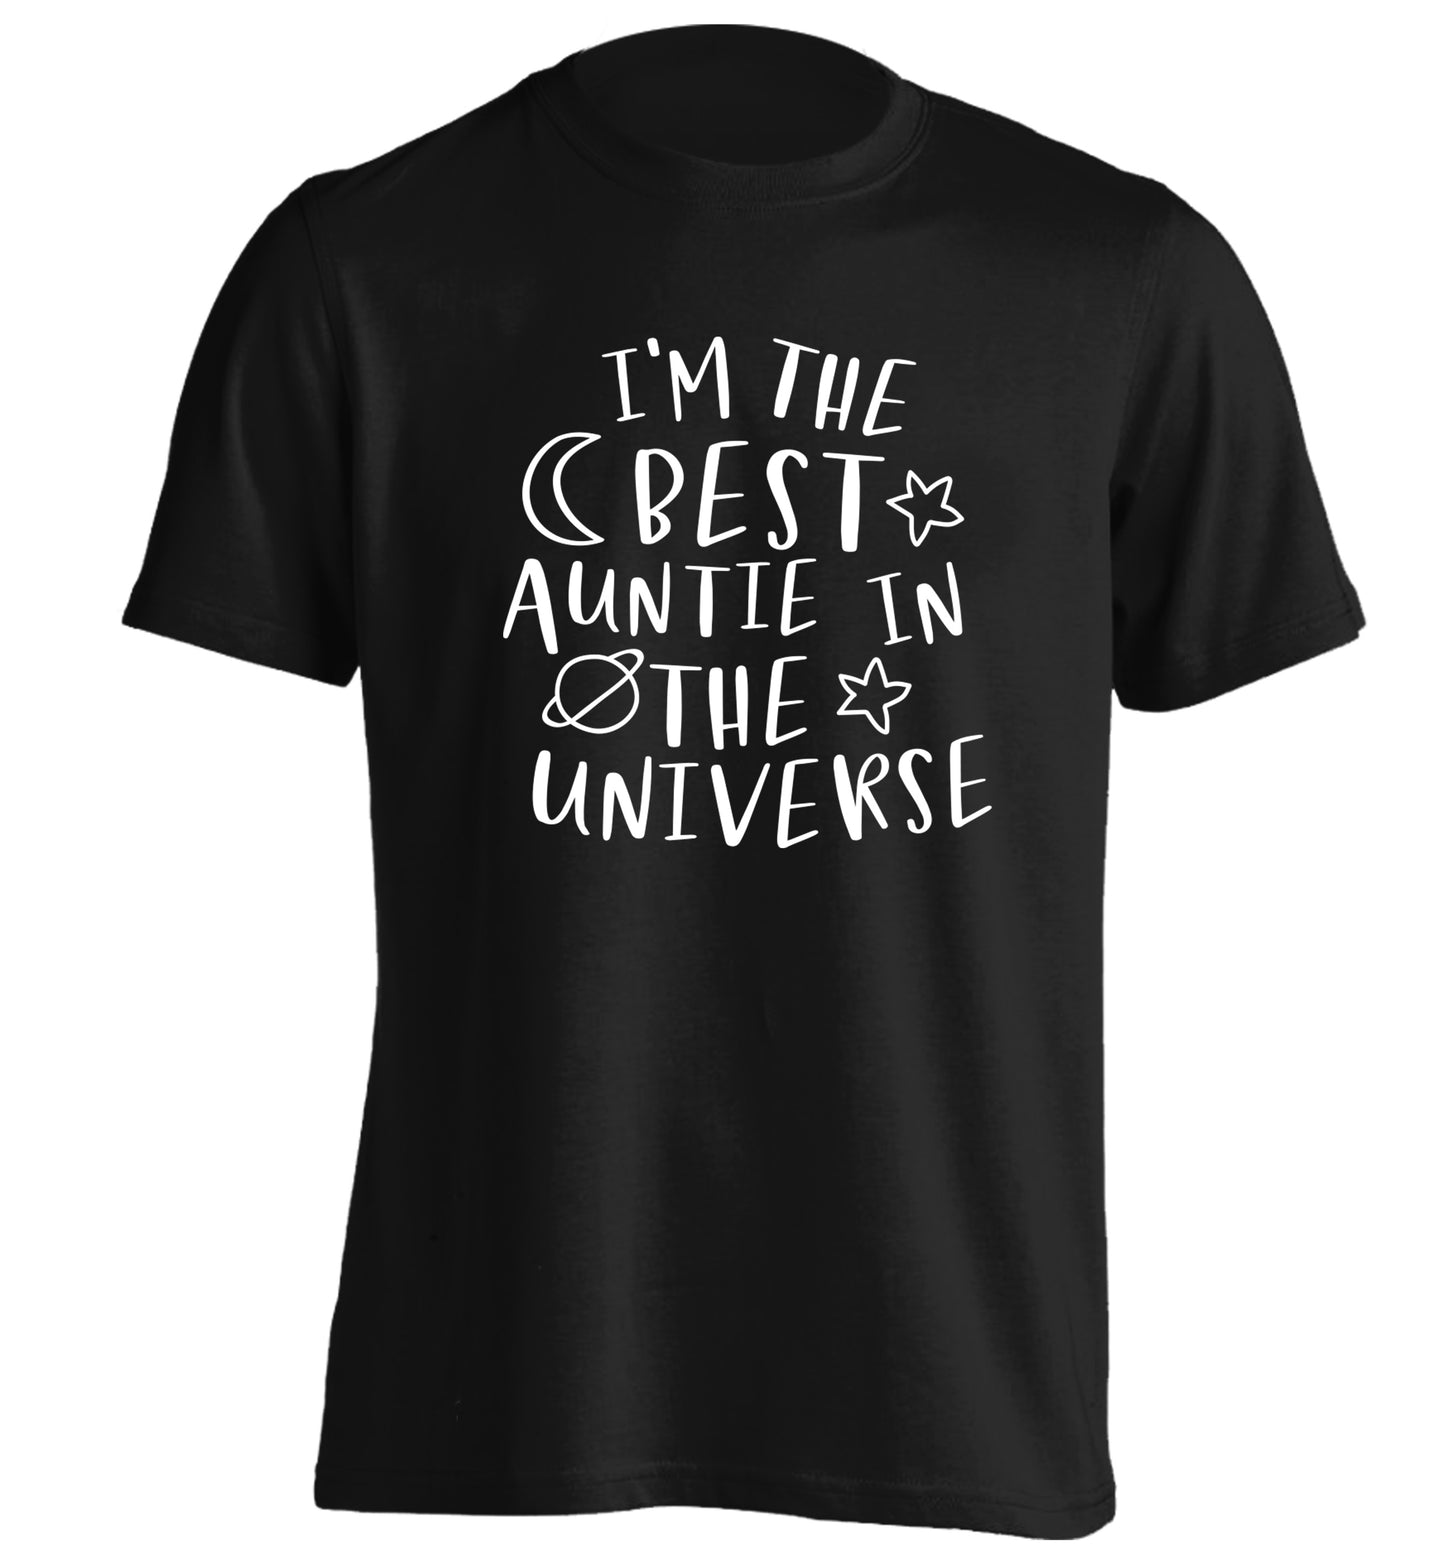 I'm the best auntie in the universe adults unisex black Tshirt 2XL